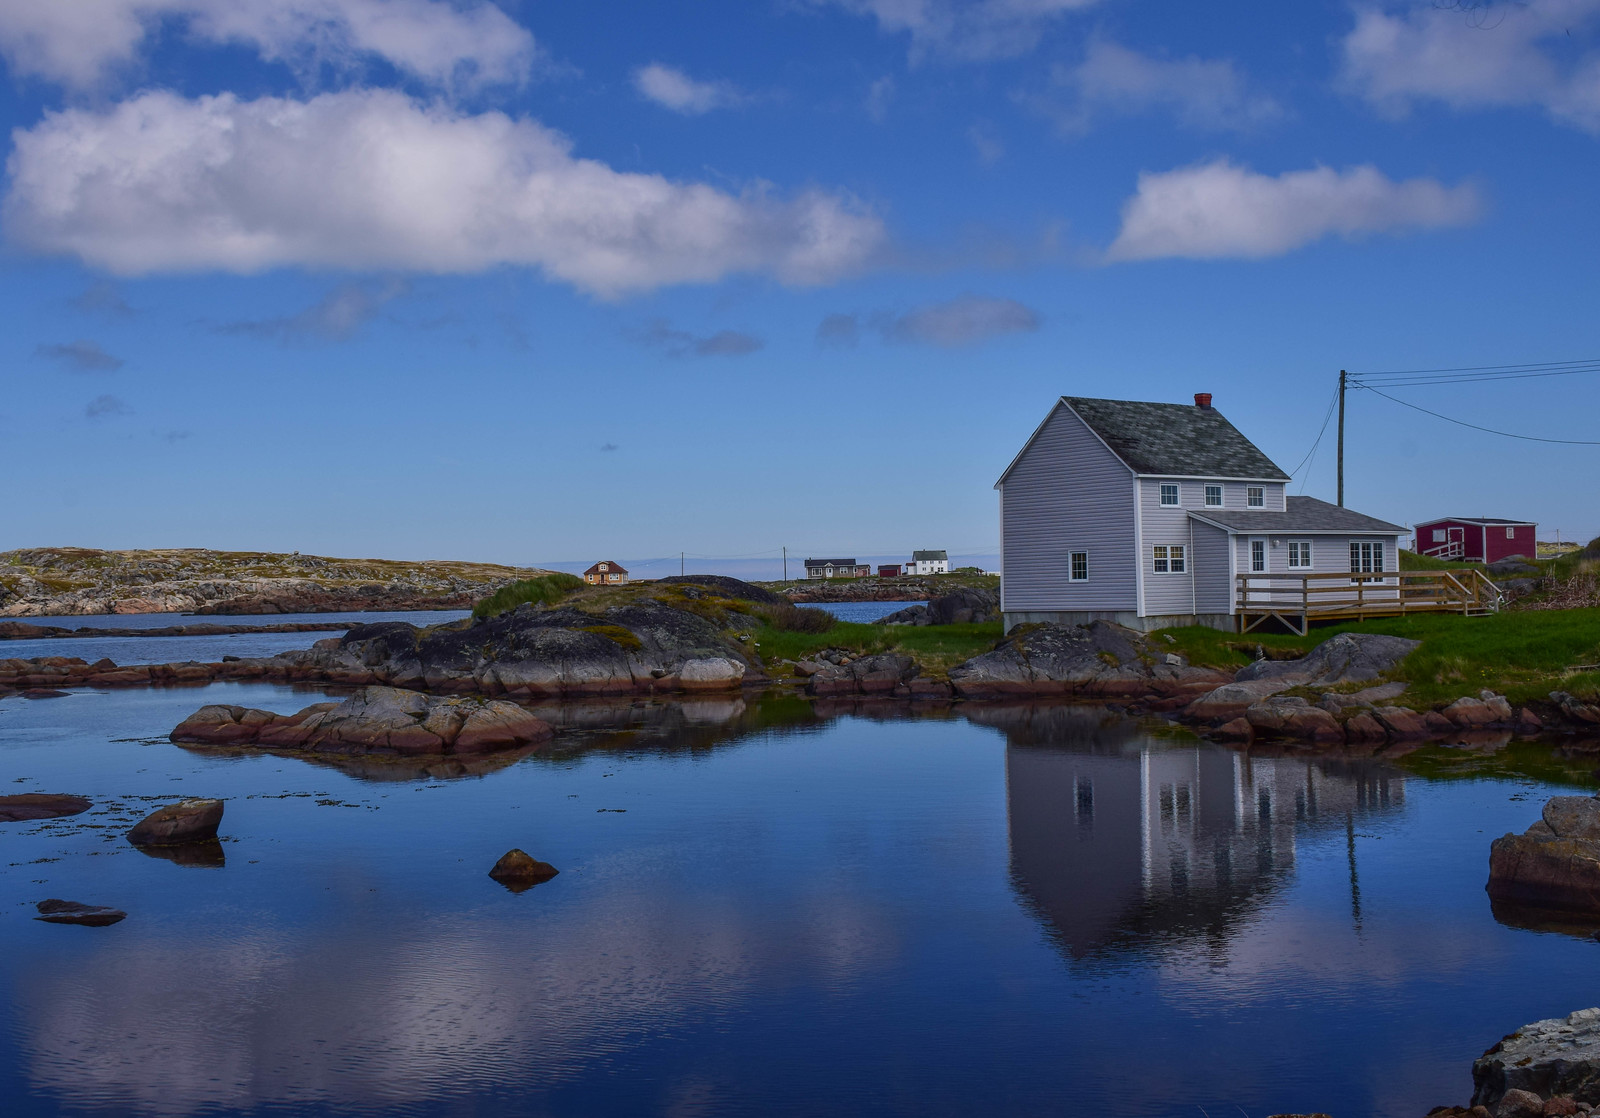 Tilting - top things to see in Fogo Island, Newfoundland. Canada